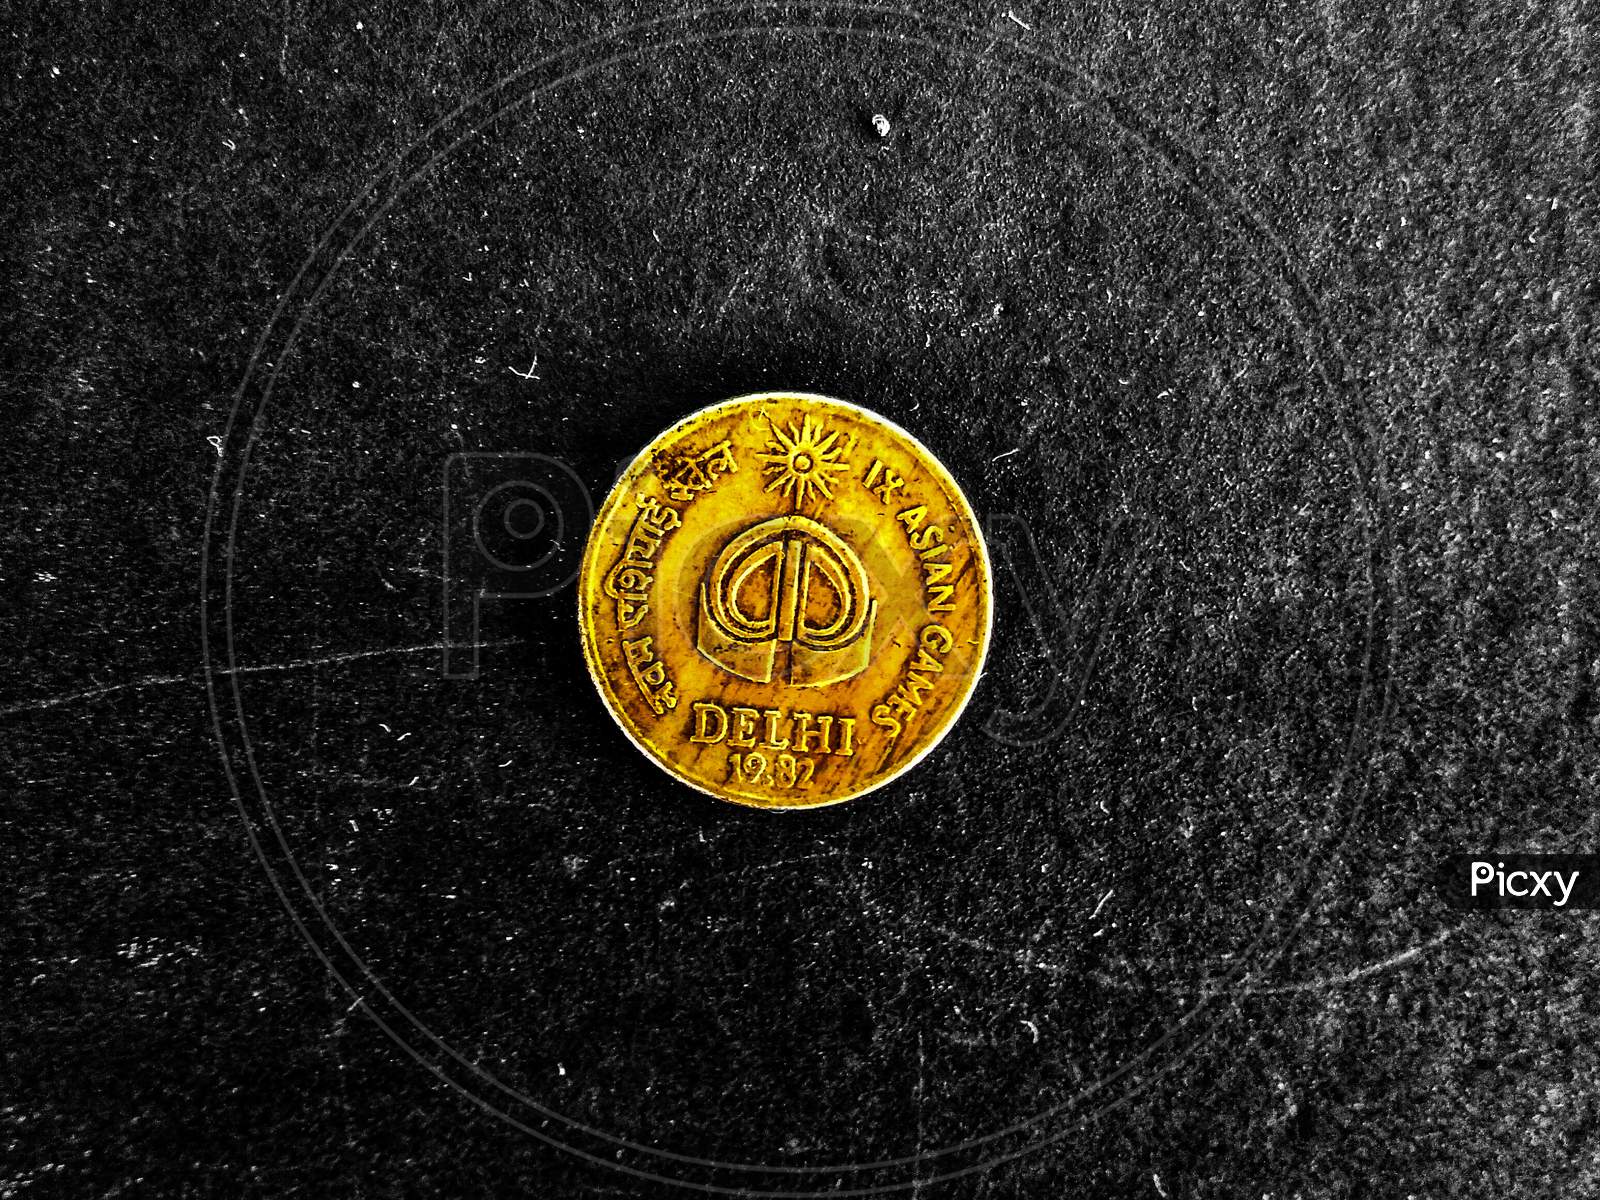 Old Indian 9th Asian Games Coin In the Year Of 1982